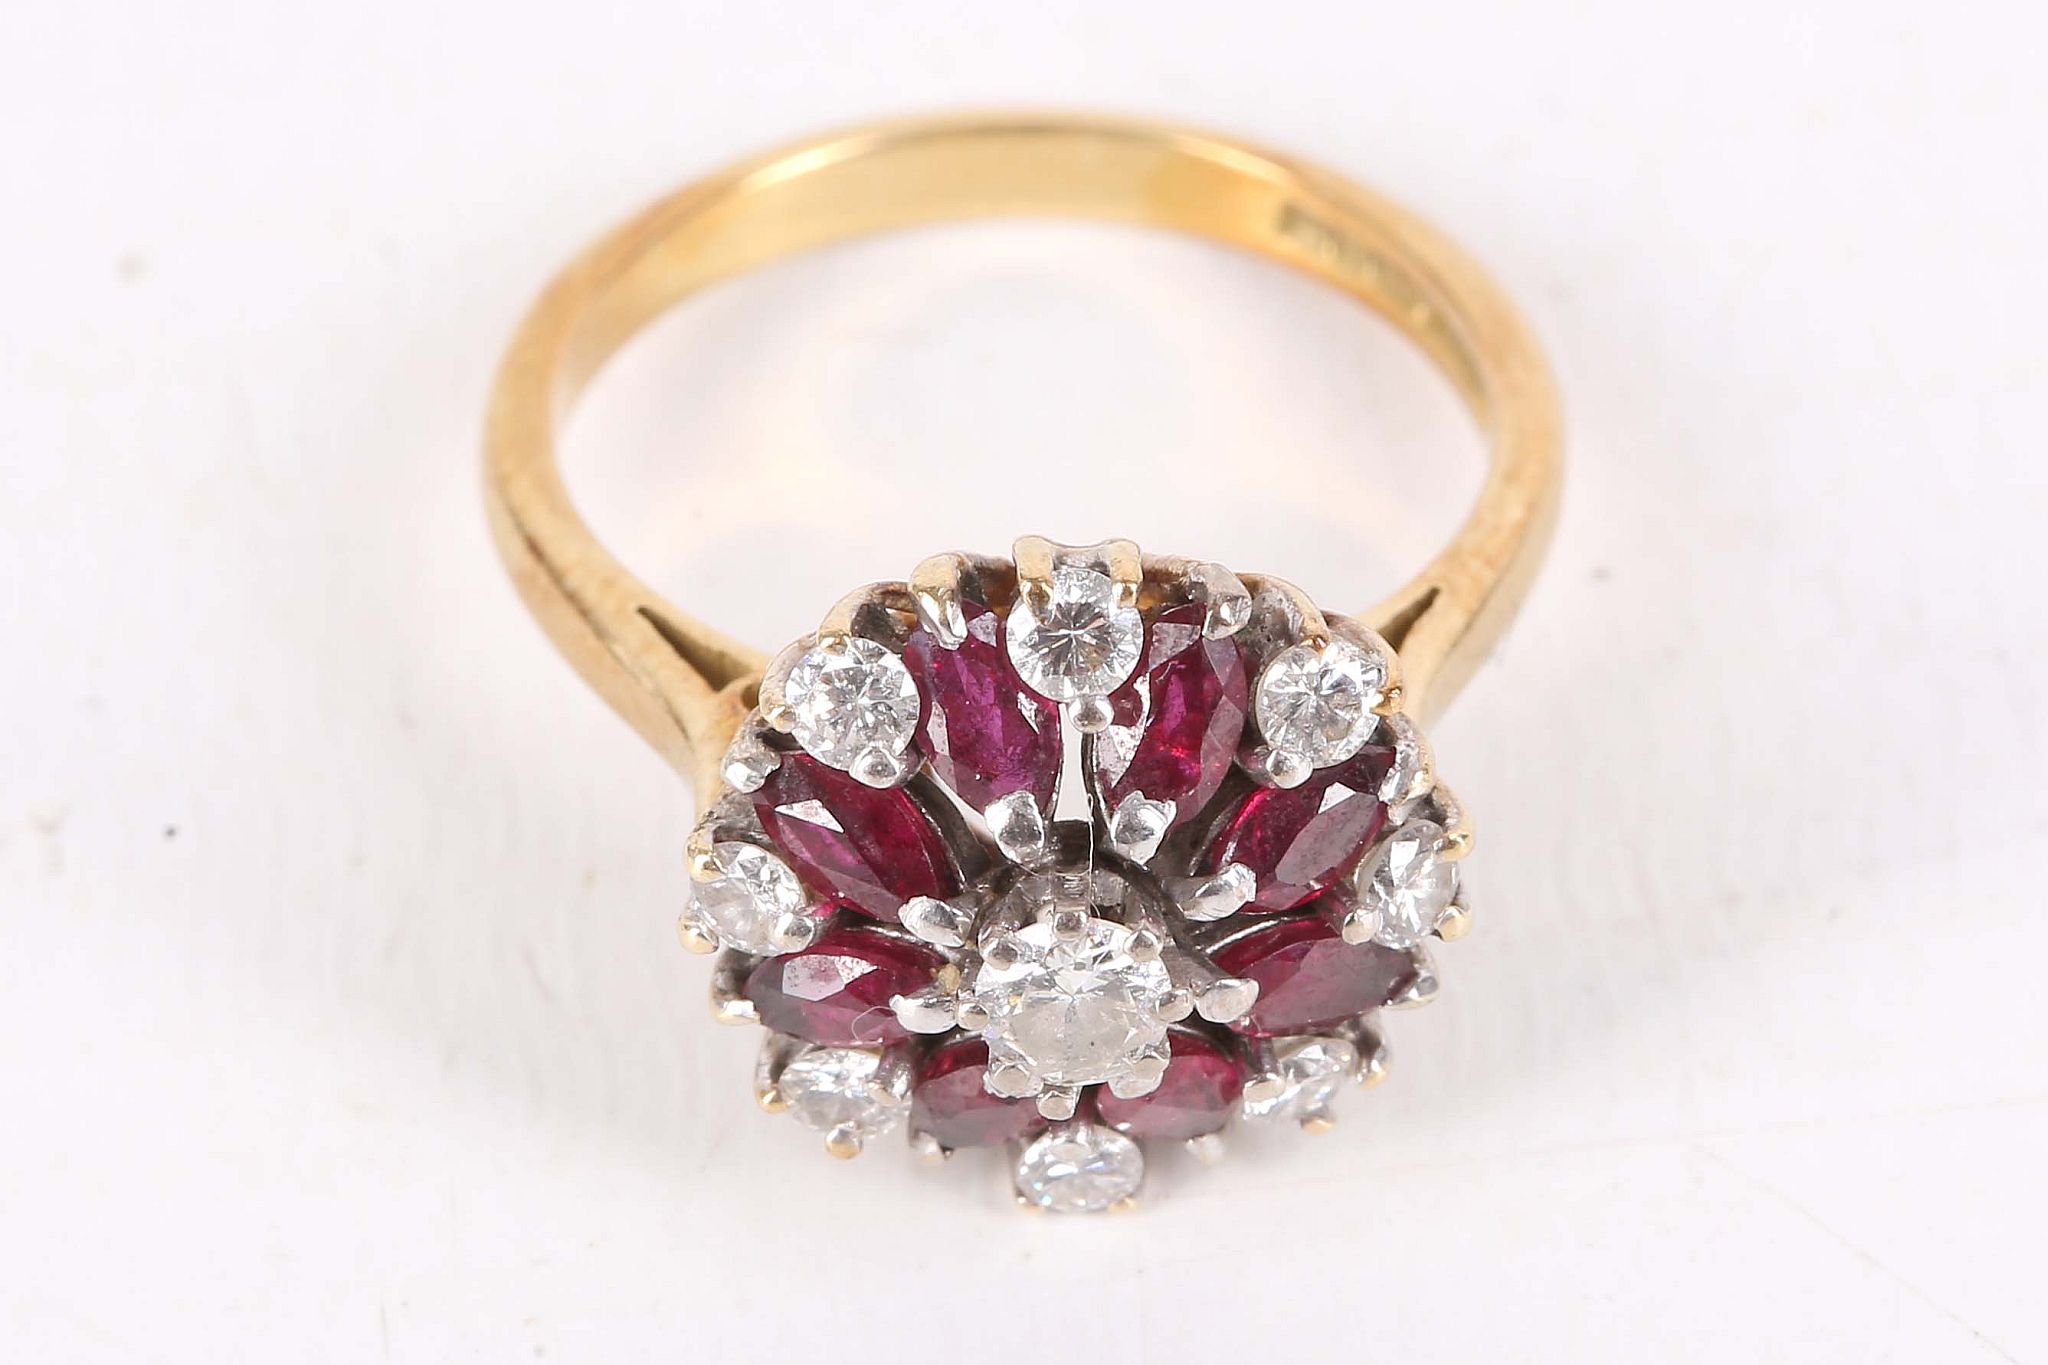 A garnet and diamond cluster ring, Set with circular-cut garnets and brilliant-cut diamonds, mounted - Image 2 of 3